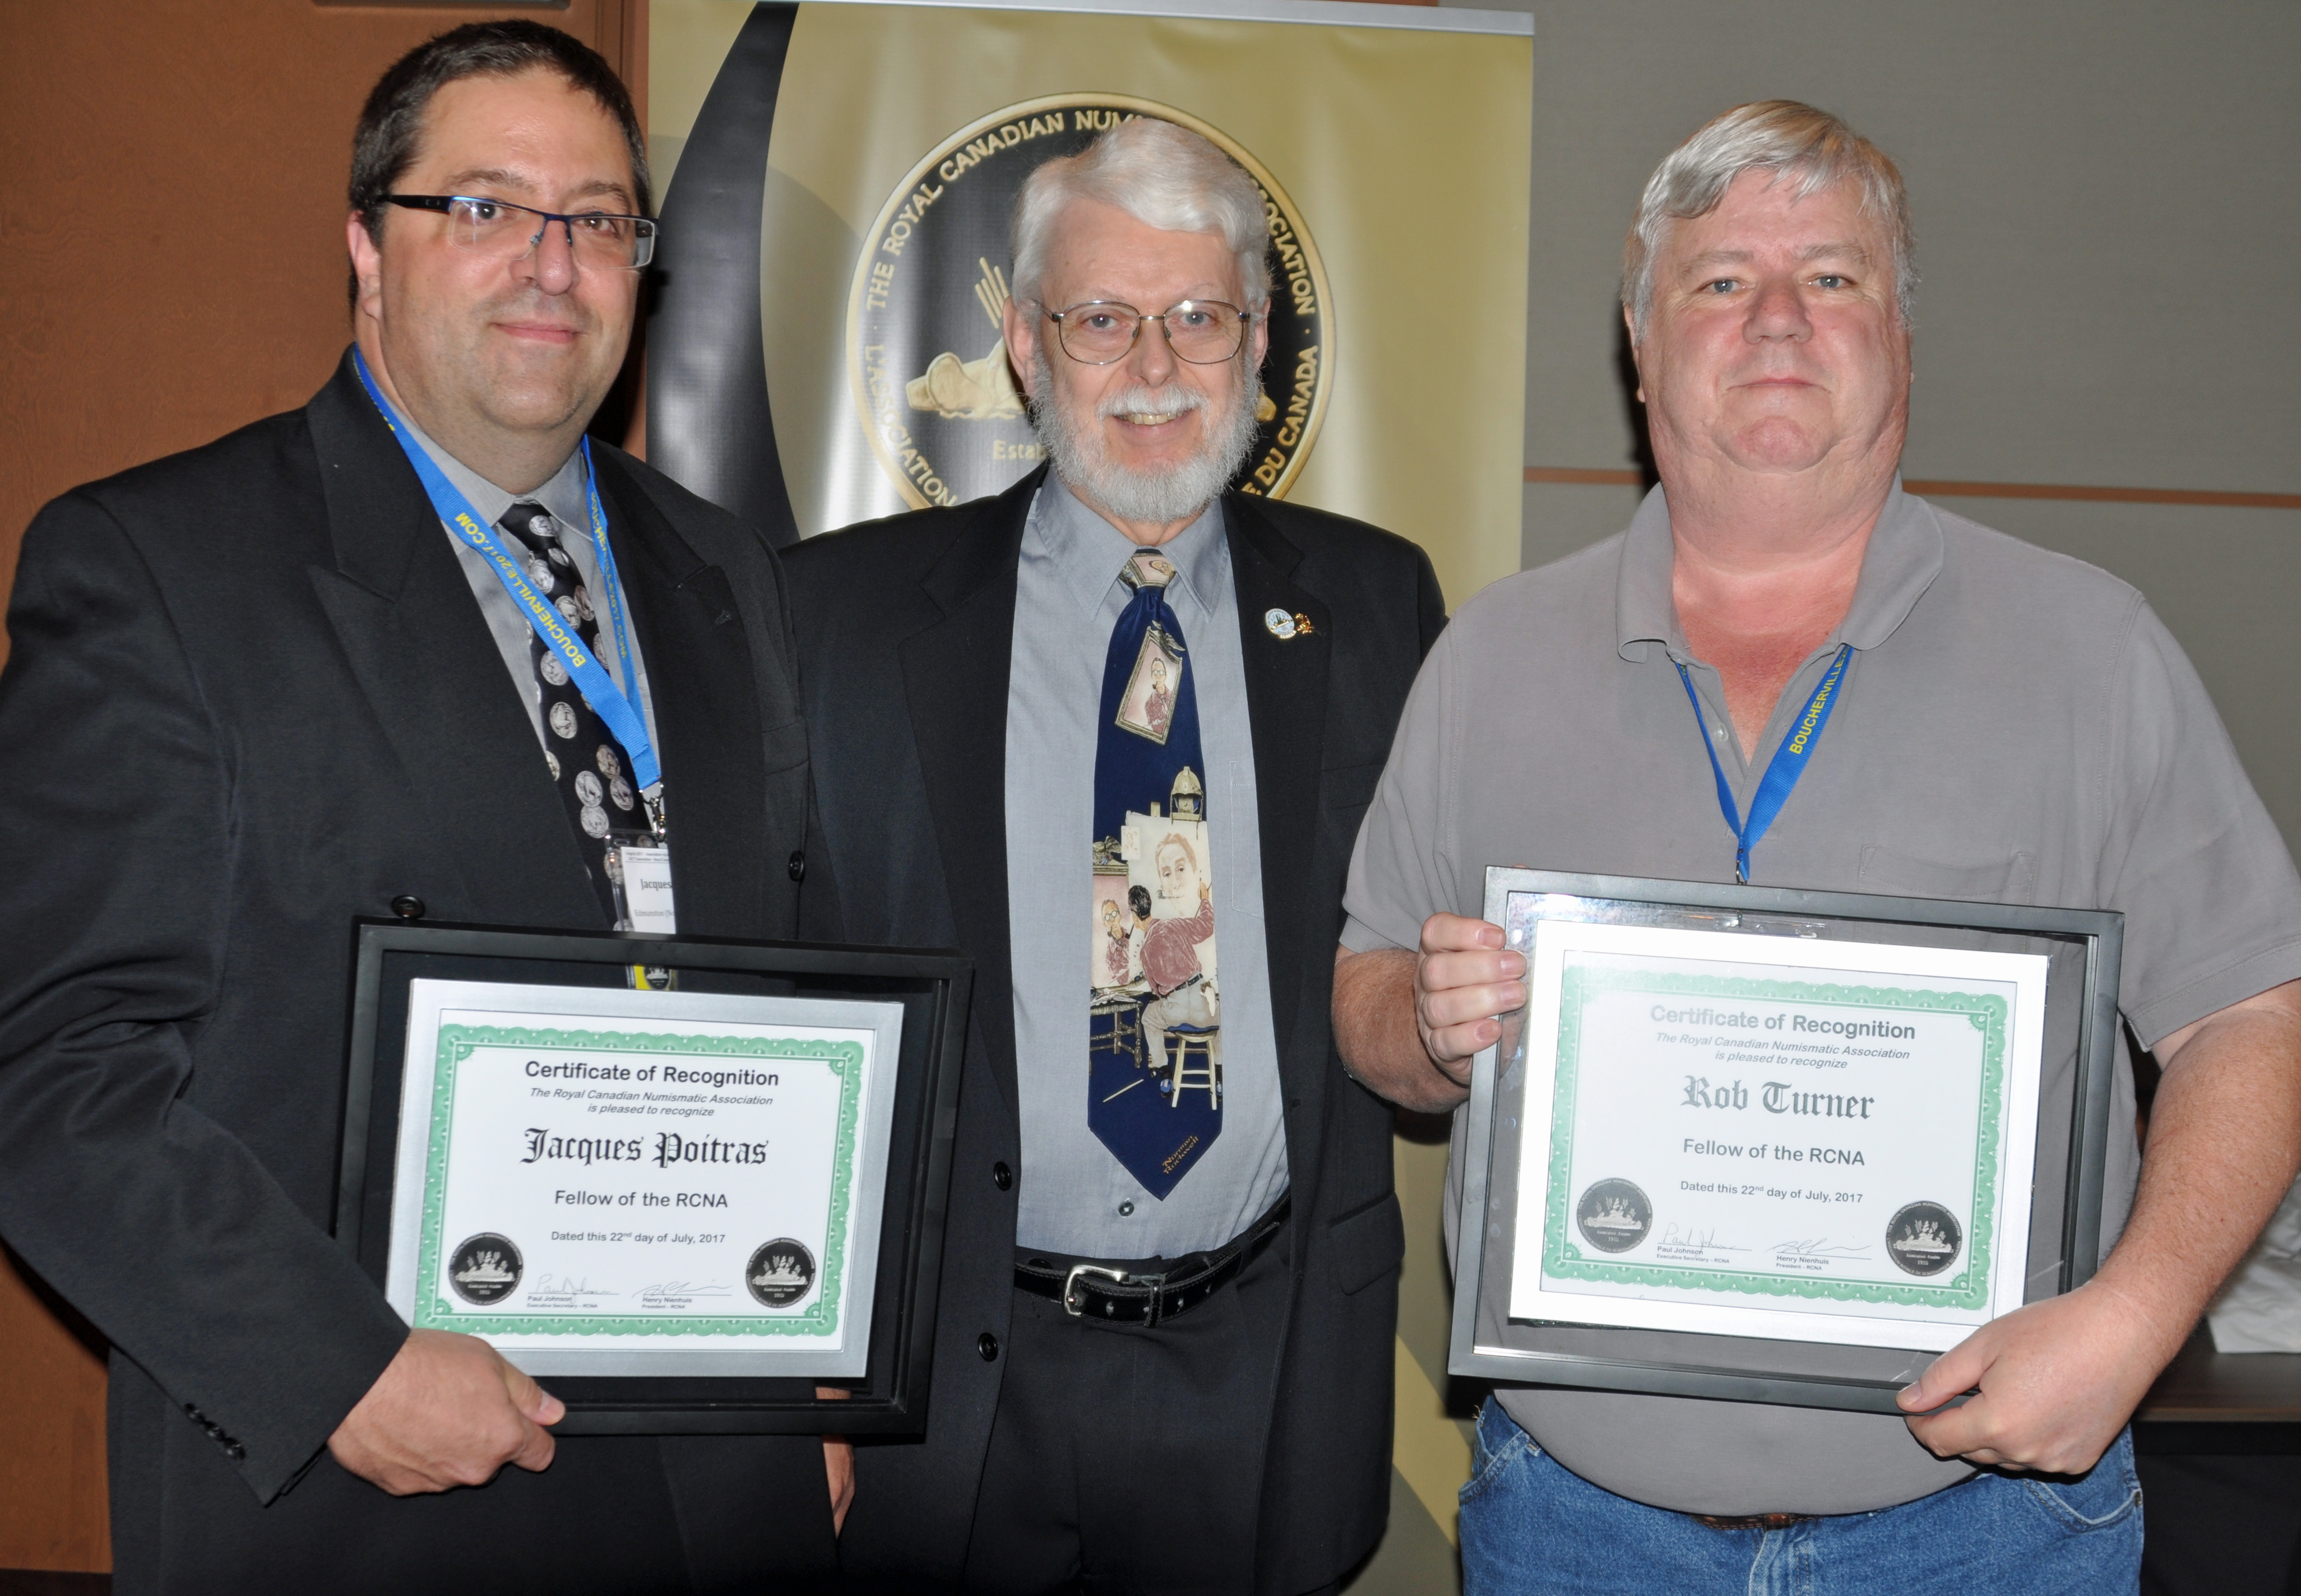 <p><strong>Jacques Poitras</strong> (left) and <strong>Rob Turner</strong> (right) receiving the Fellow Award from <strong>Paul Petch</strong> (center).</p>
<p>Photo courtesy Jeff Fournier.</p>